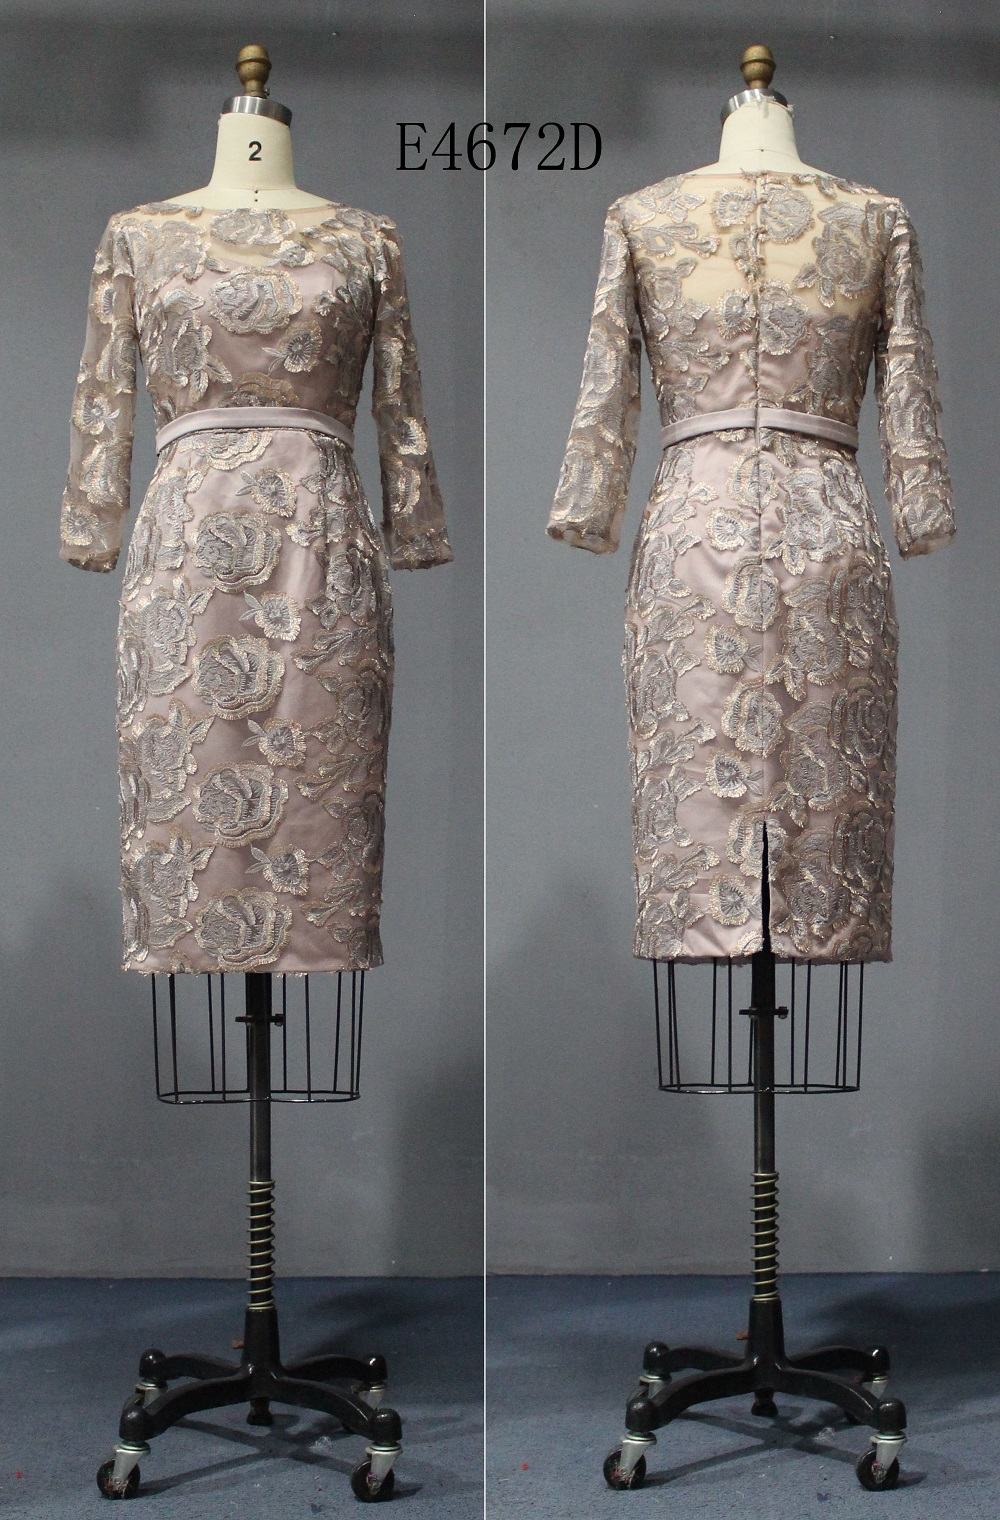 Long Sleeve Lace Cocktail Dresses for Mother of the Groom